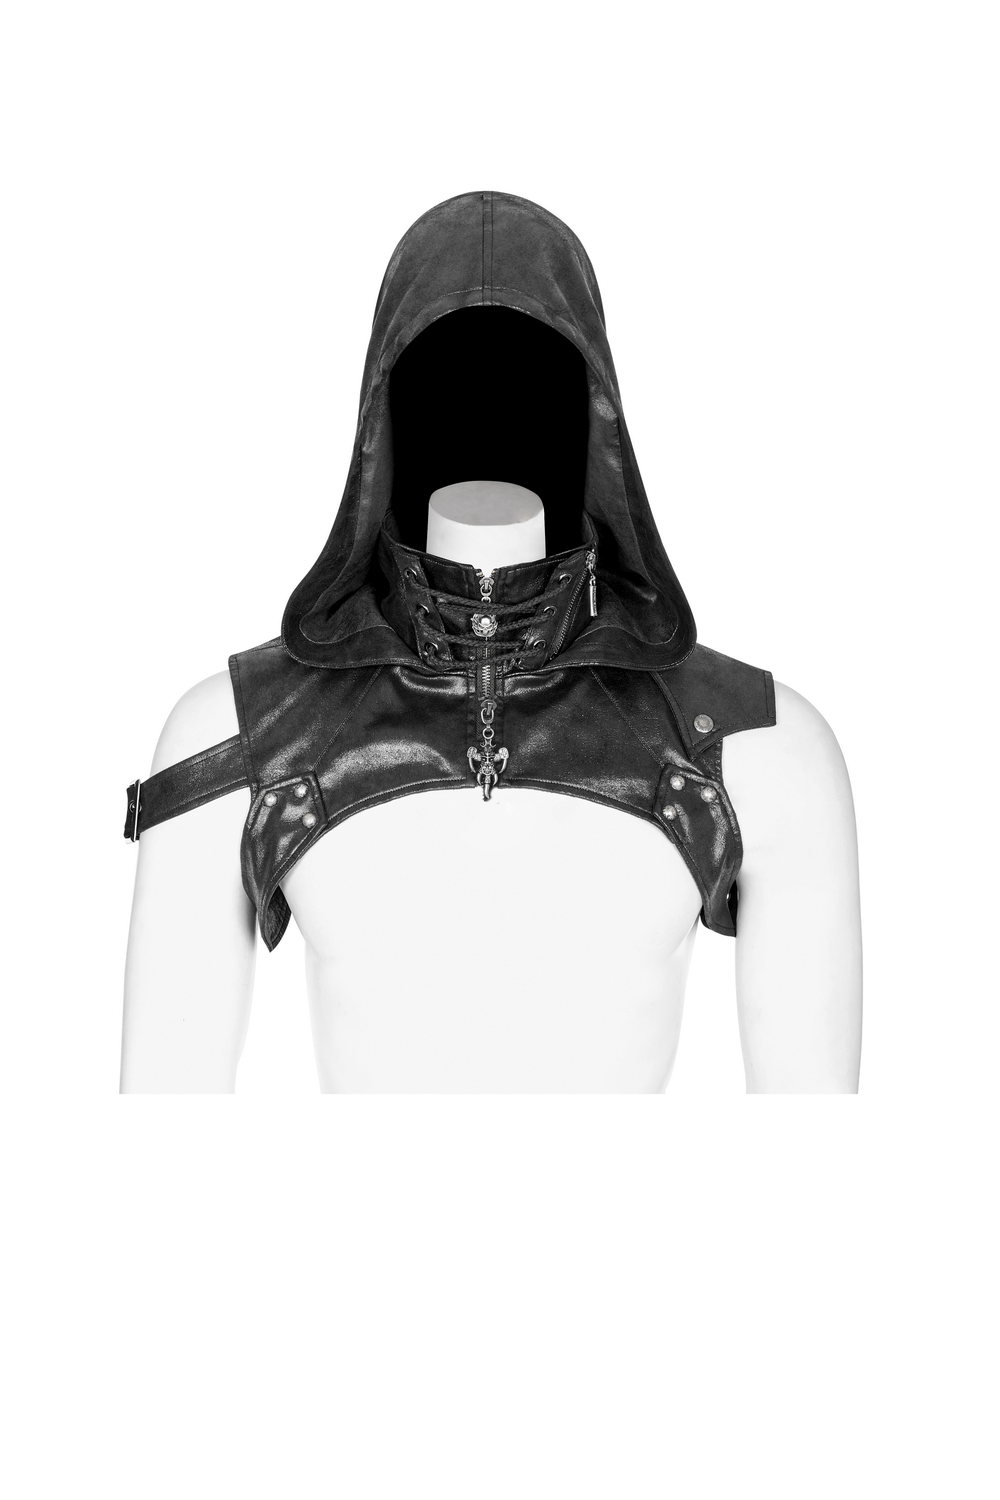 Crack Skin Stitched Punk Hood with Corns and Tie Rope